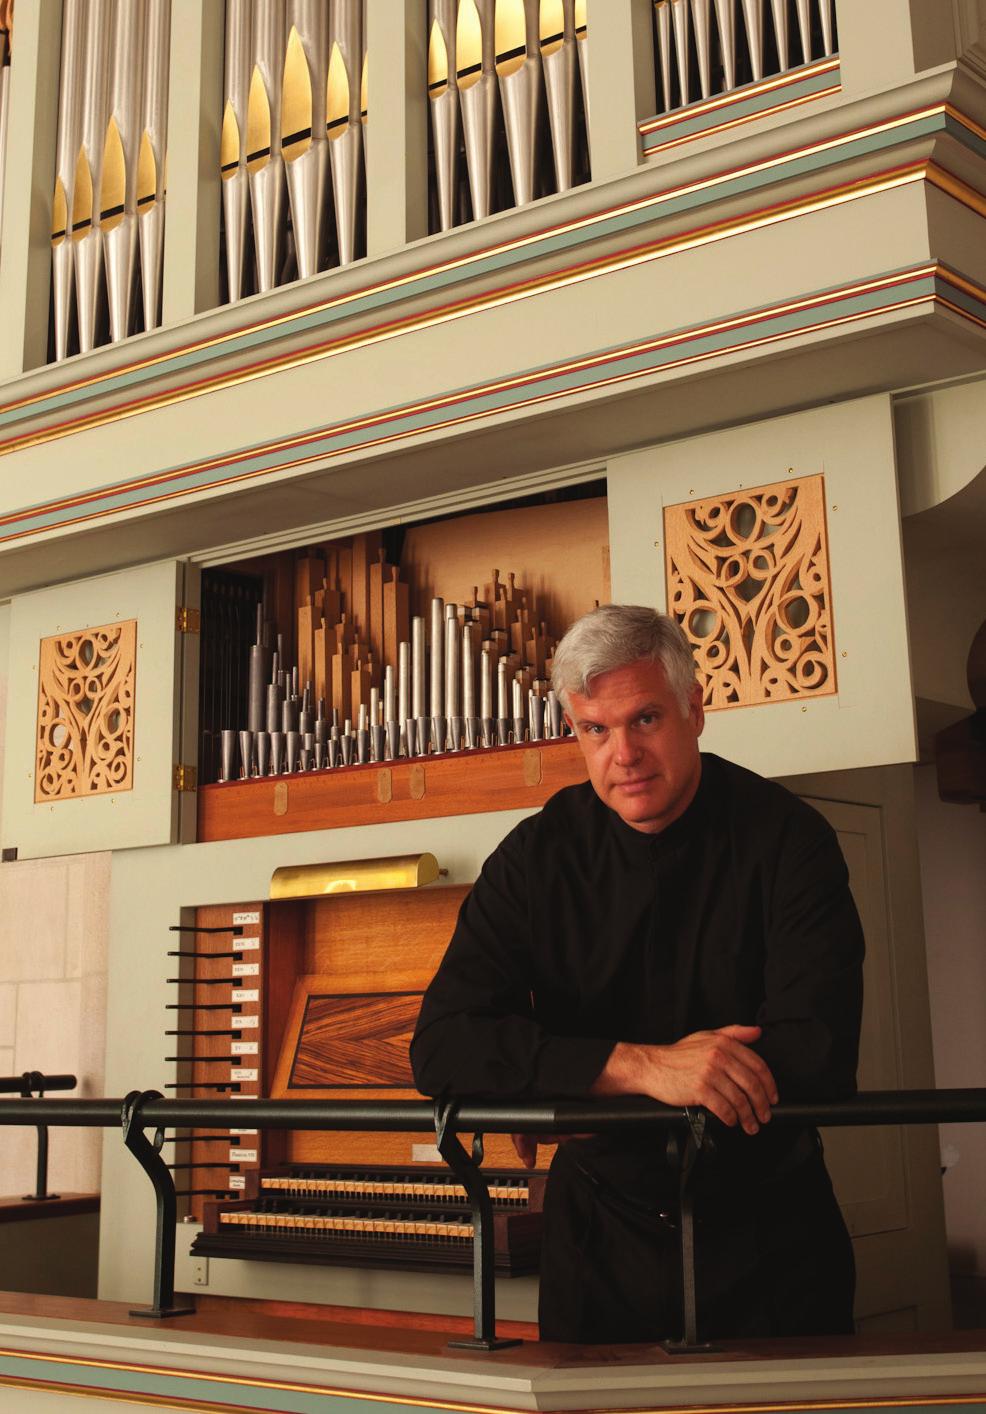 David Arcus Sunday, September 18, 2011 2:30 & 5:00 p.m. D David Arcus is the Associate University Organist and Chapel Organist at Duke, as well as the Divinity School Organist and an Adjunct Associate Professor of Sacred Music.